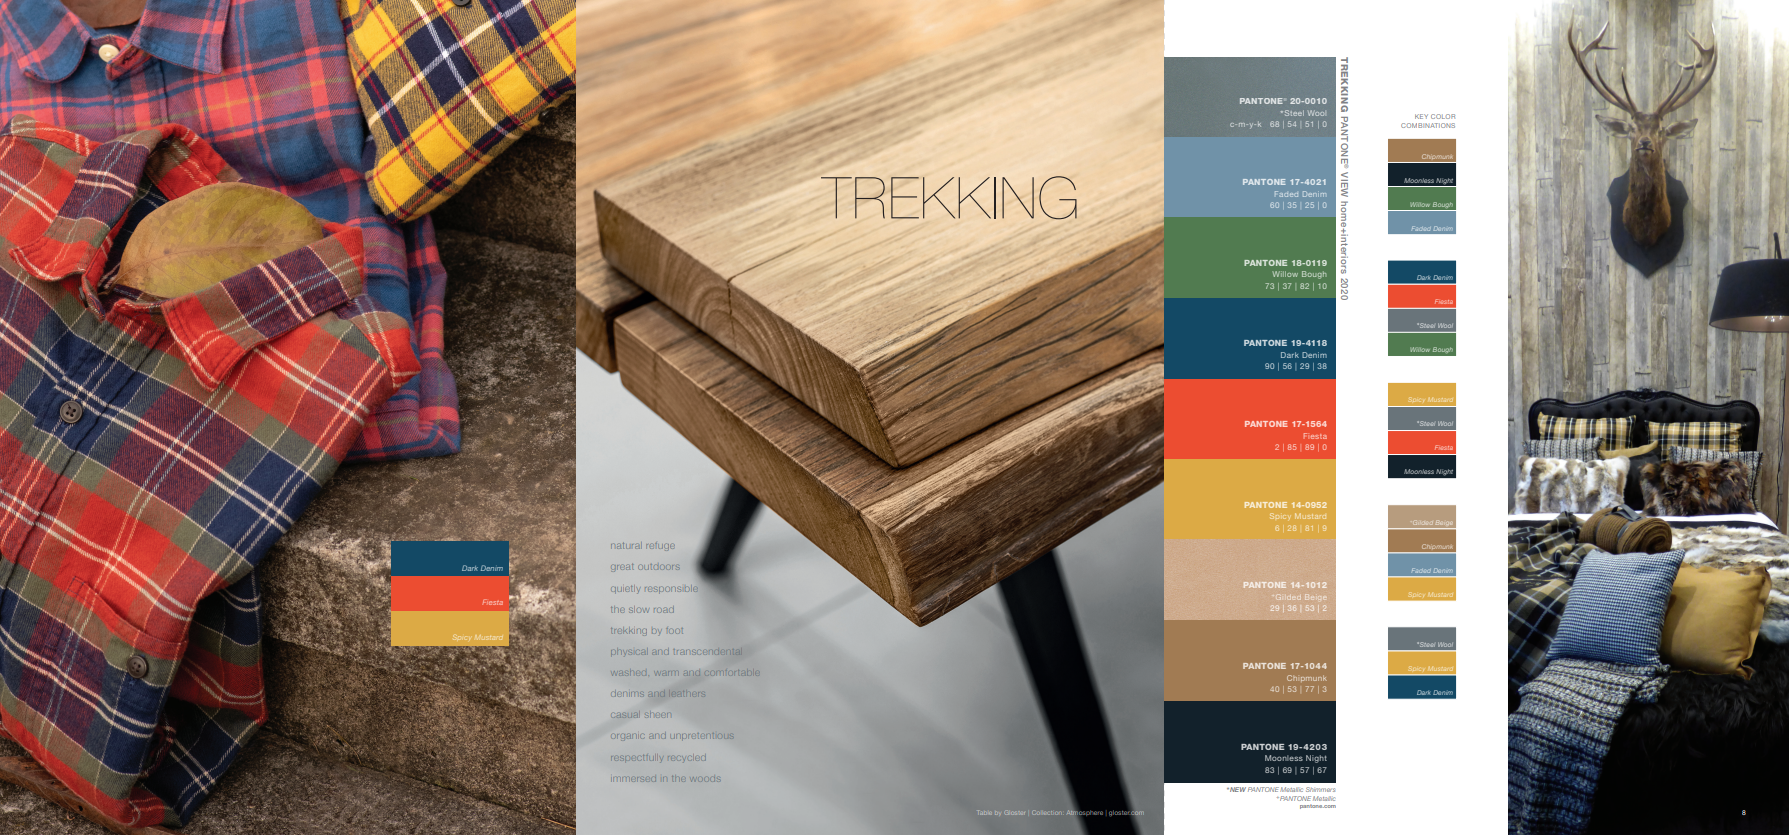 A mood board showing the Pantone Color Institute's Trekking Palette for 2020